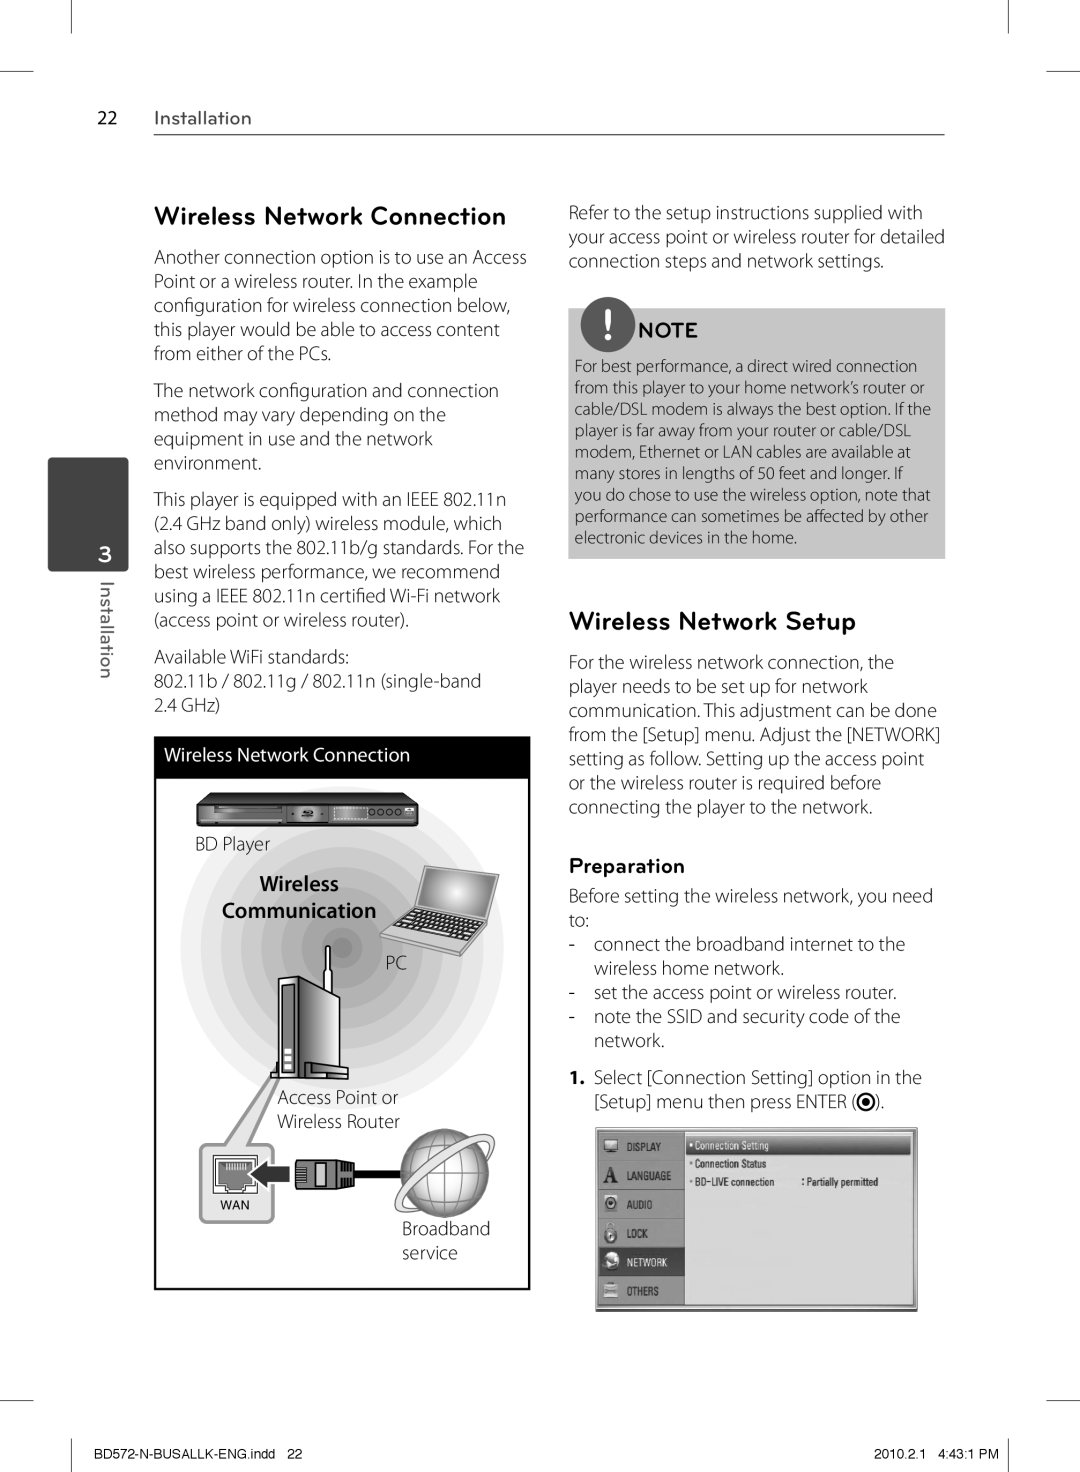 LG Electronics BD570 Wireless Network Connection, Wireless Network Setup, Communication, Installation, Preparation 